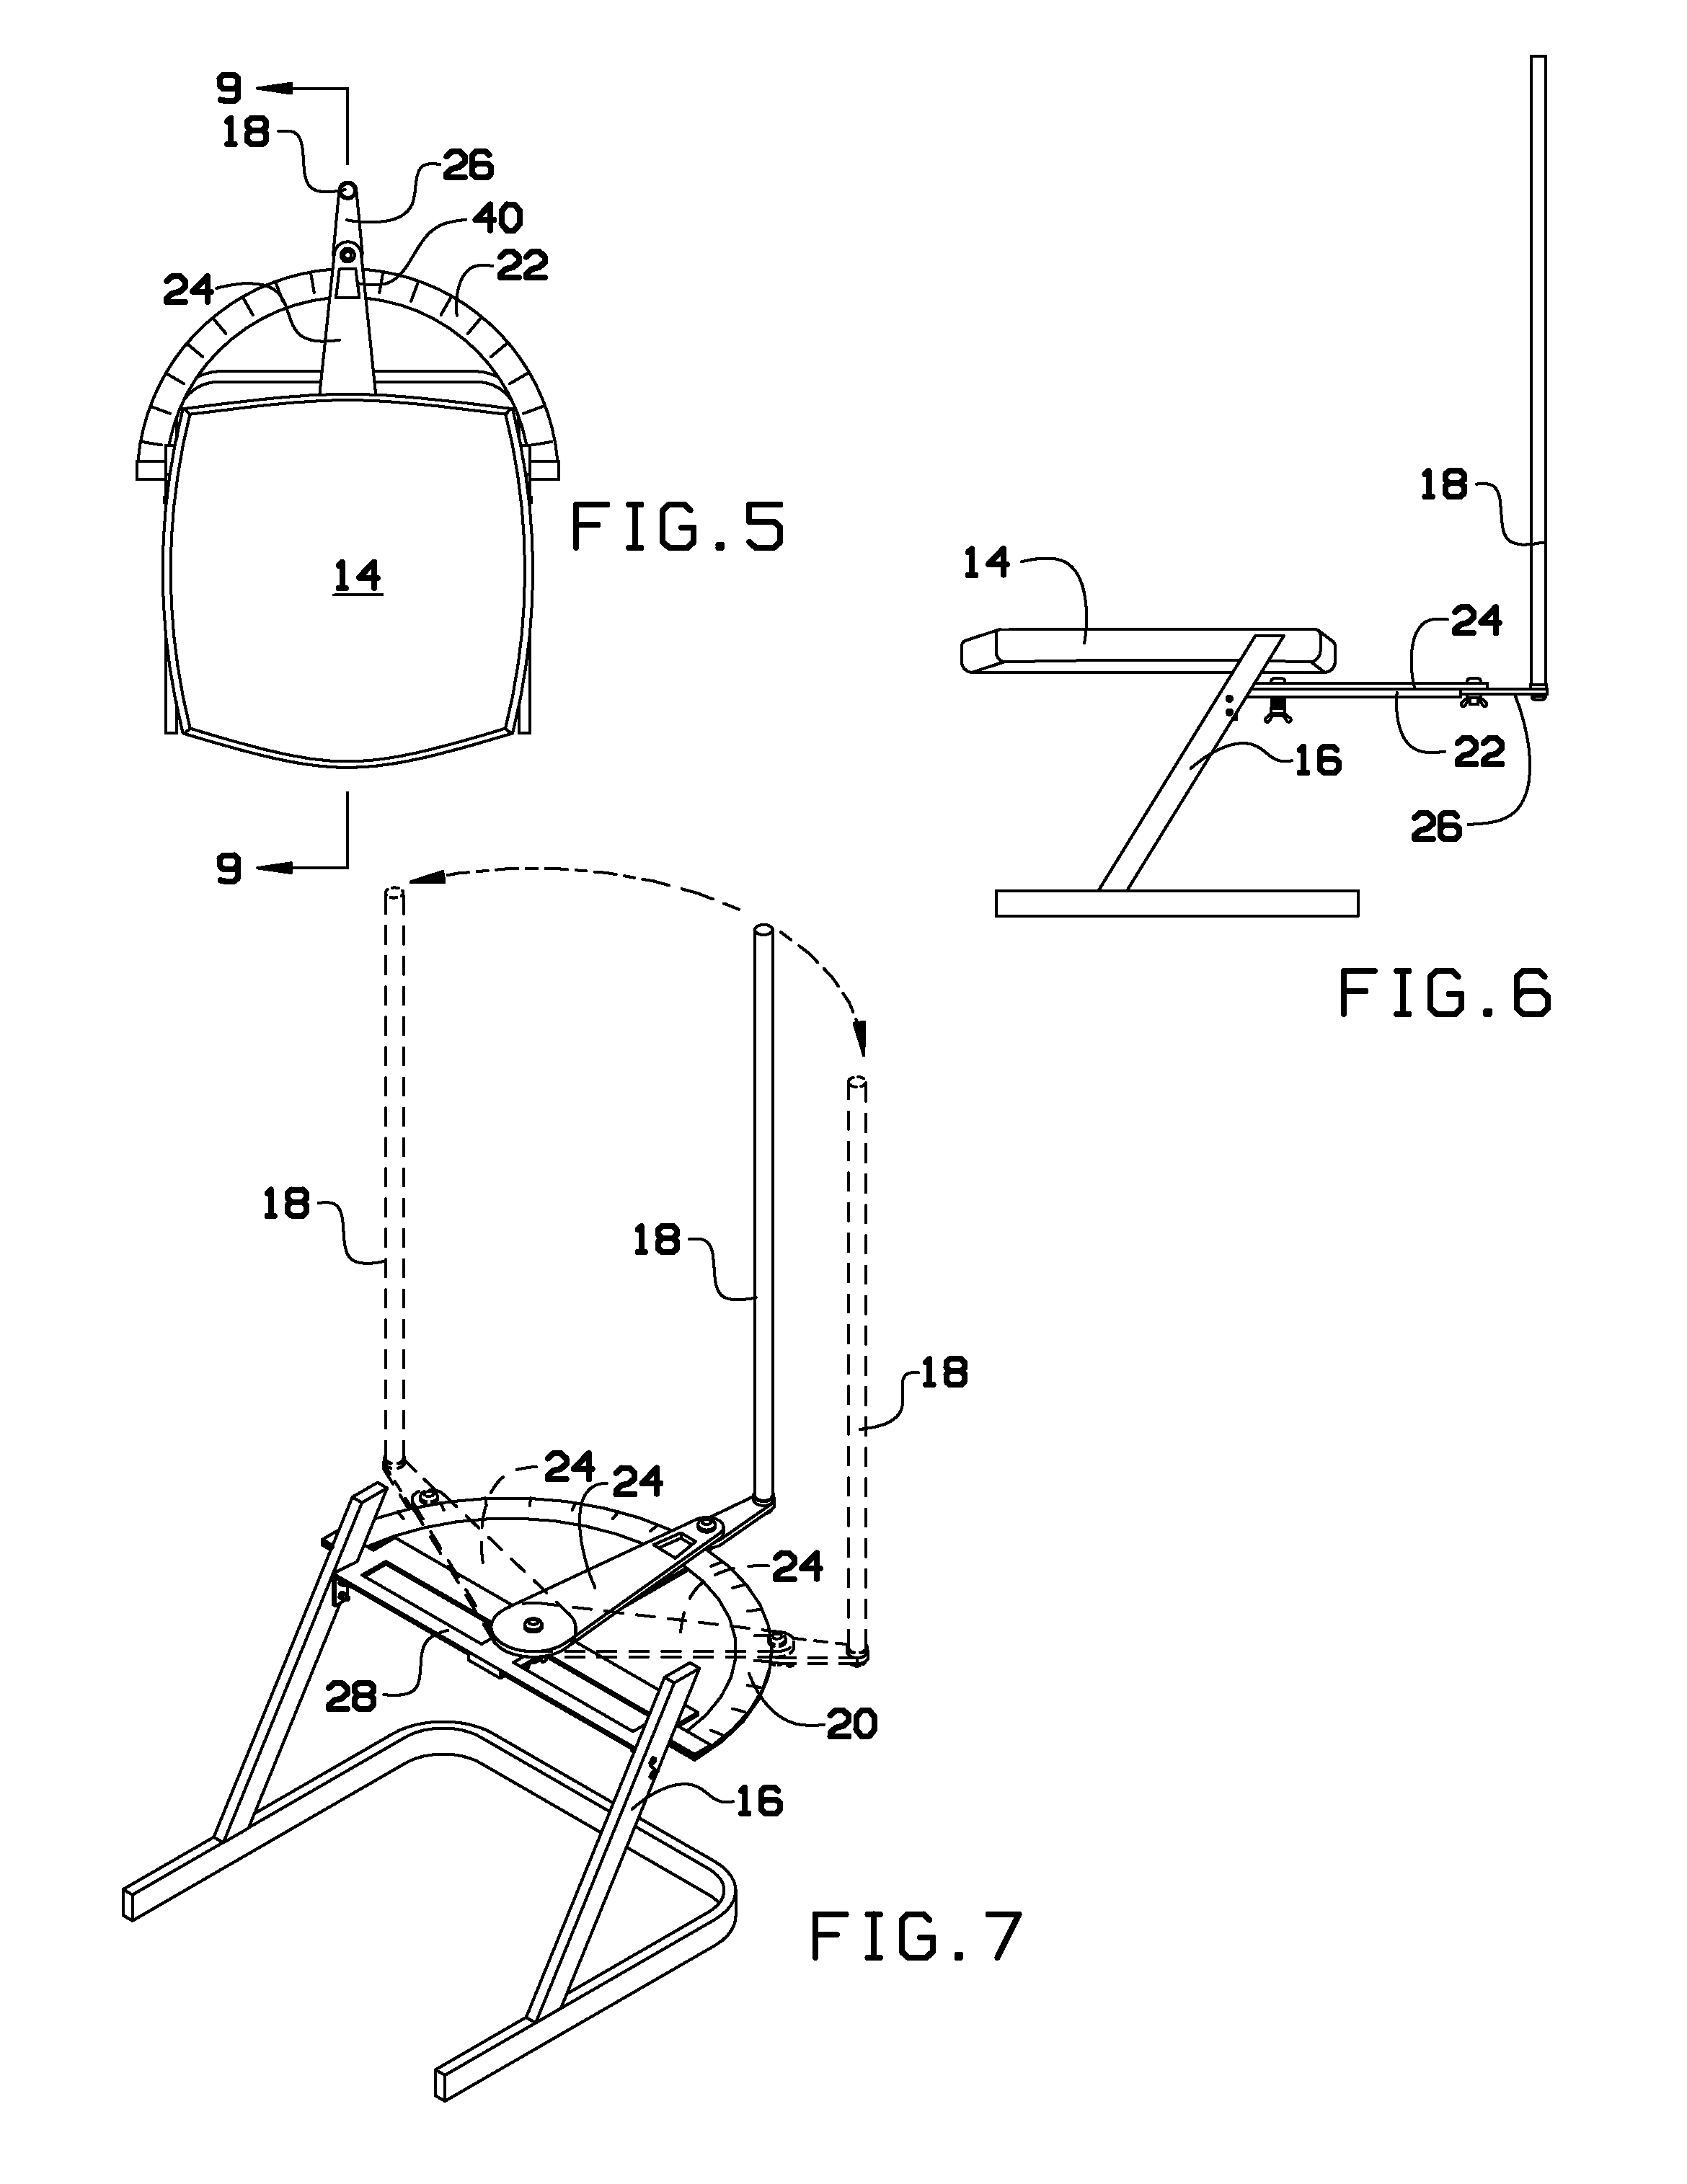 Device for measuring a person's trunk rotation from a seated position